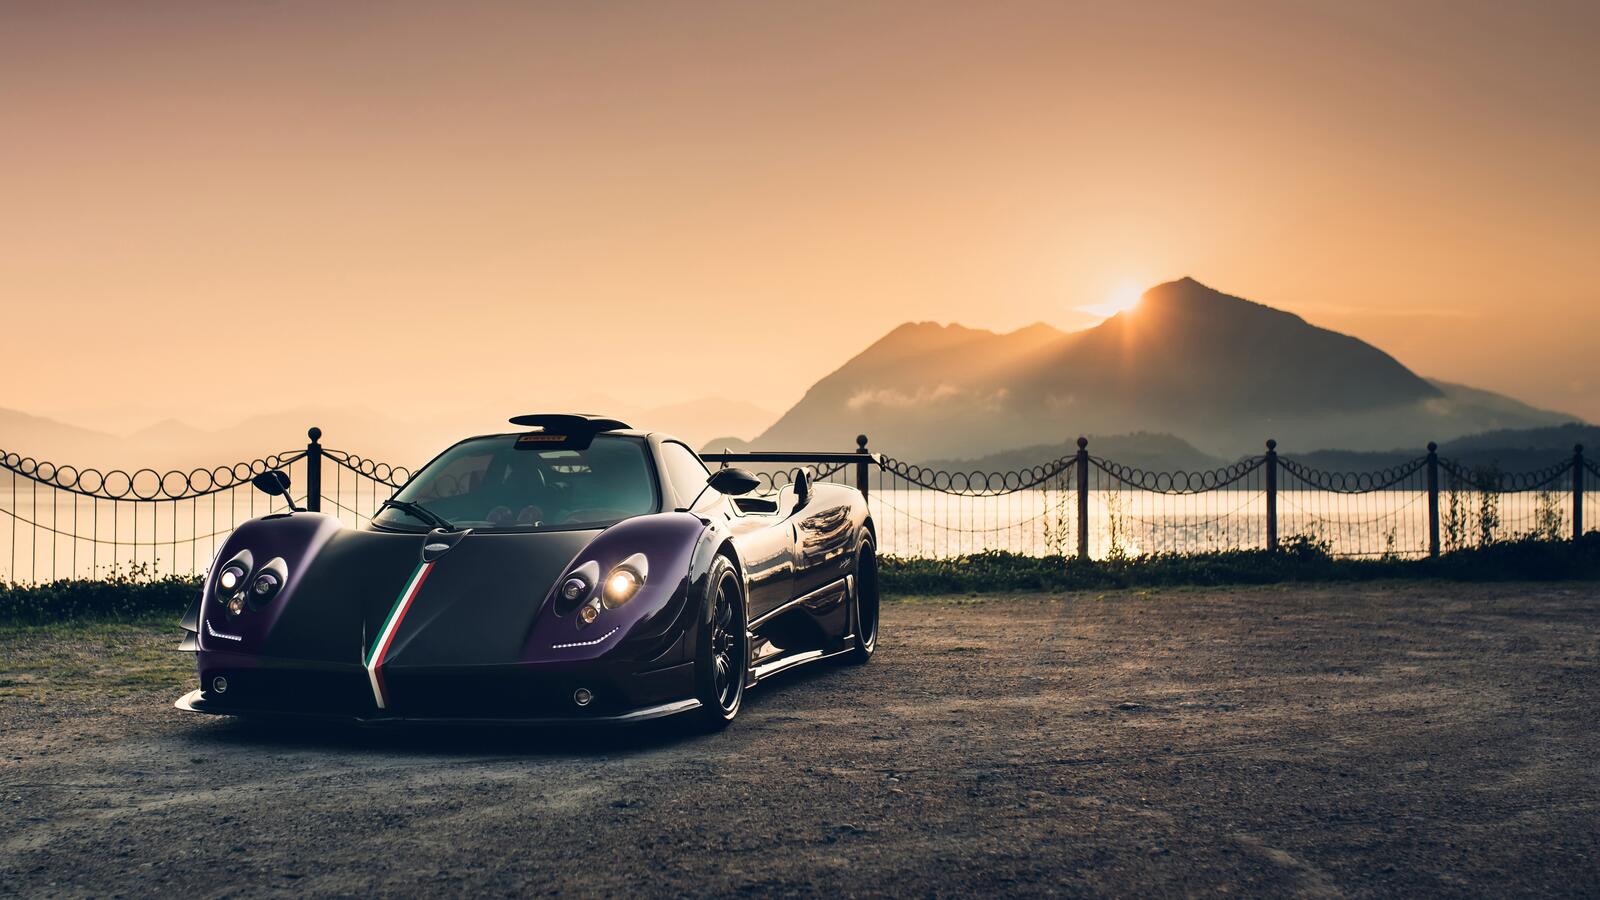 Wallpapers sunset supercars mountains on the desktop